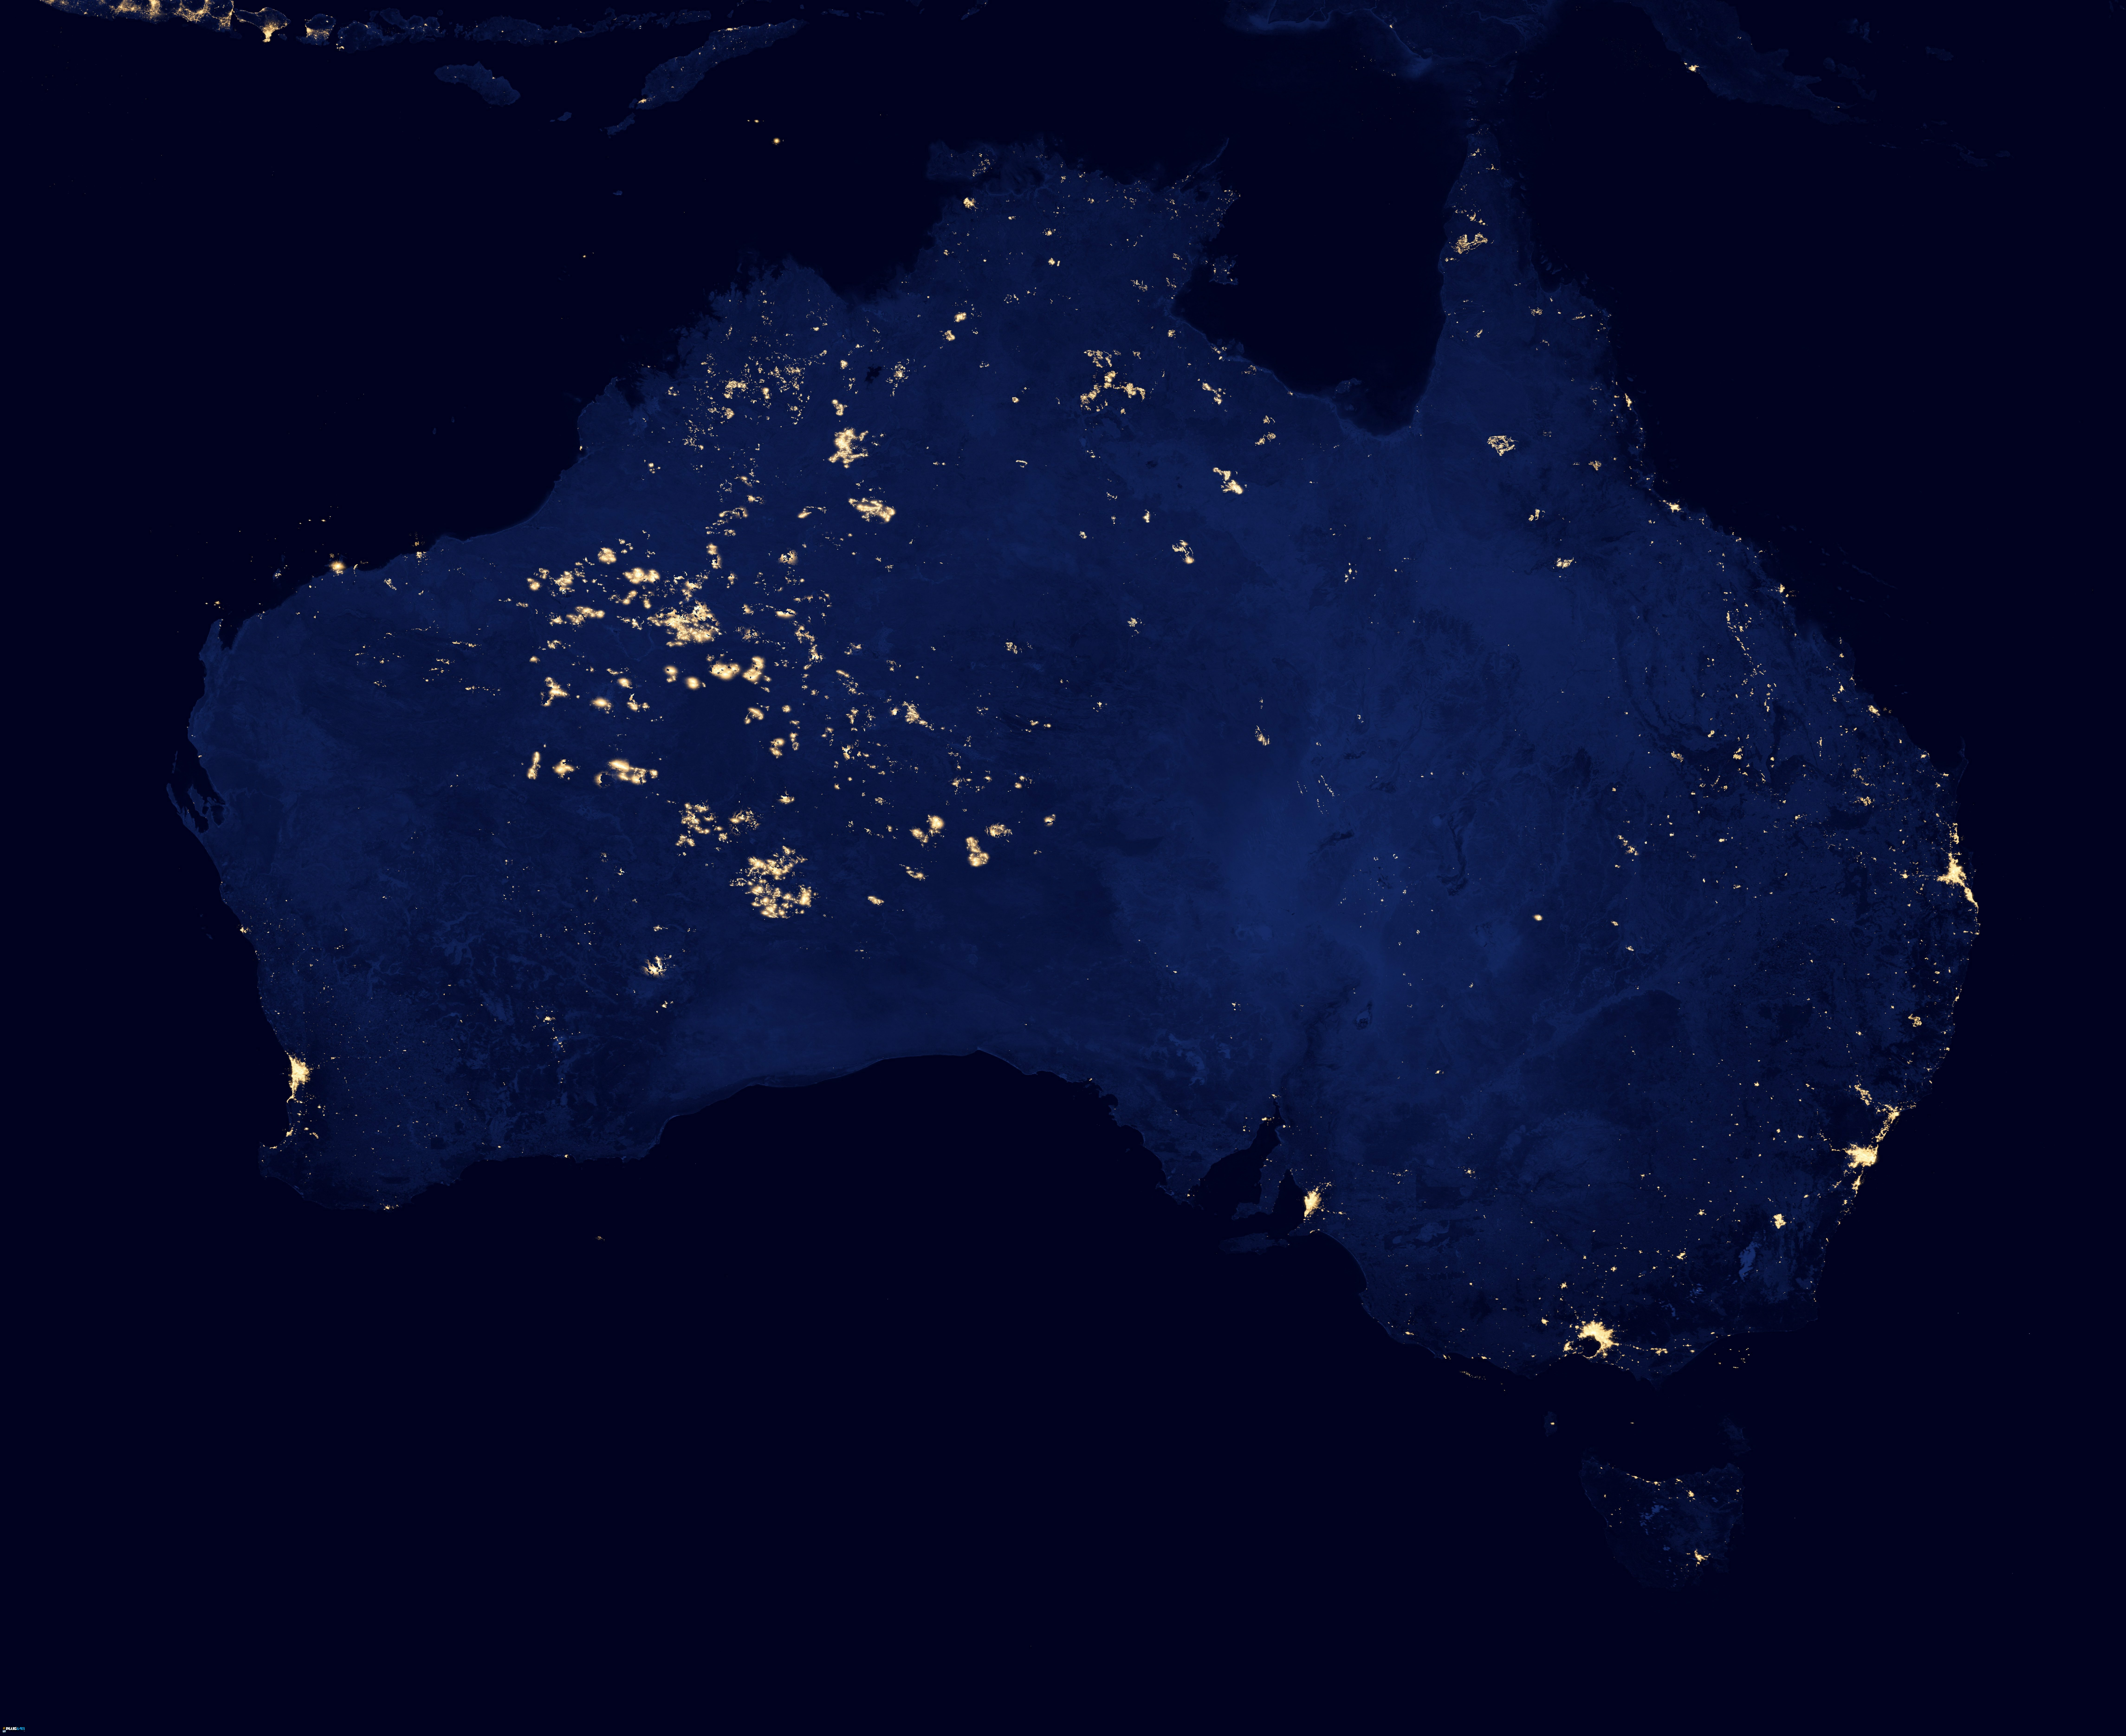 Australia - lights at night, look at the size of the mines in the desert